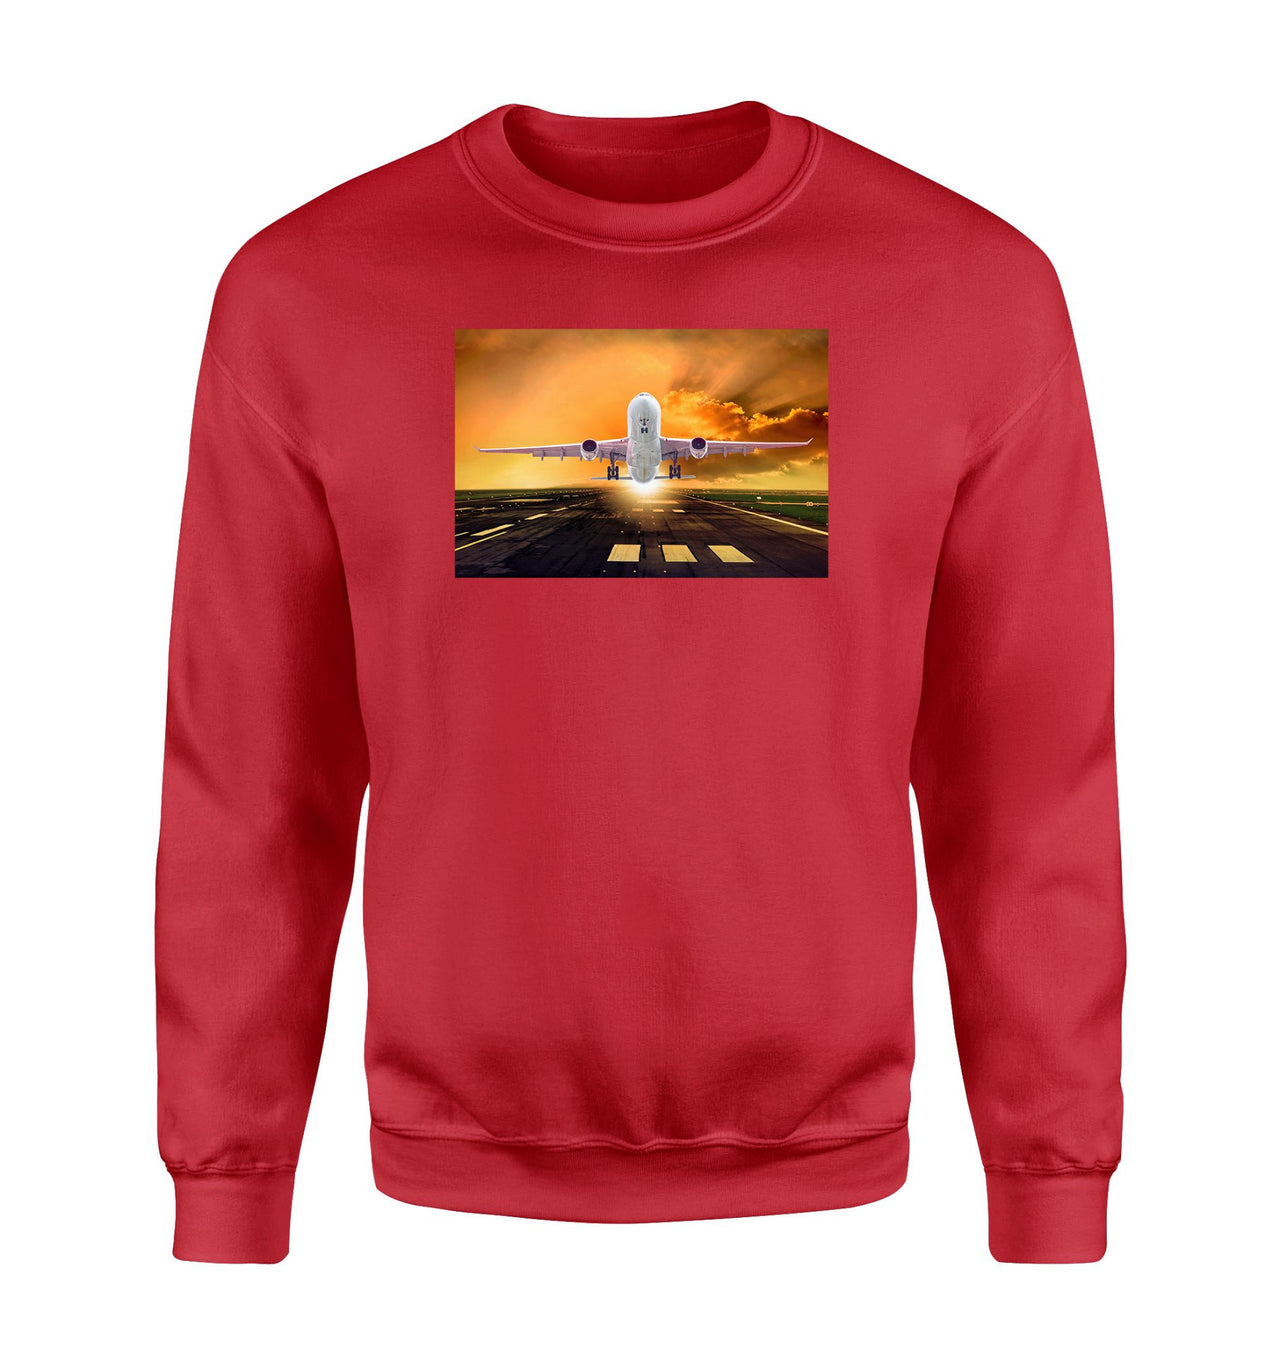 Amazing Departing Aircraft Sunset & Clouds Behind Designed Sweatshirts